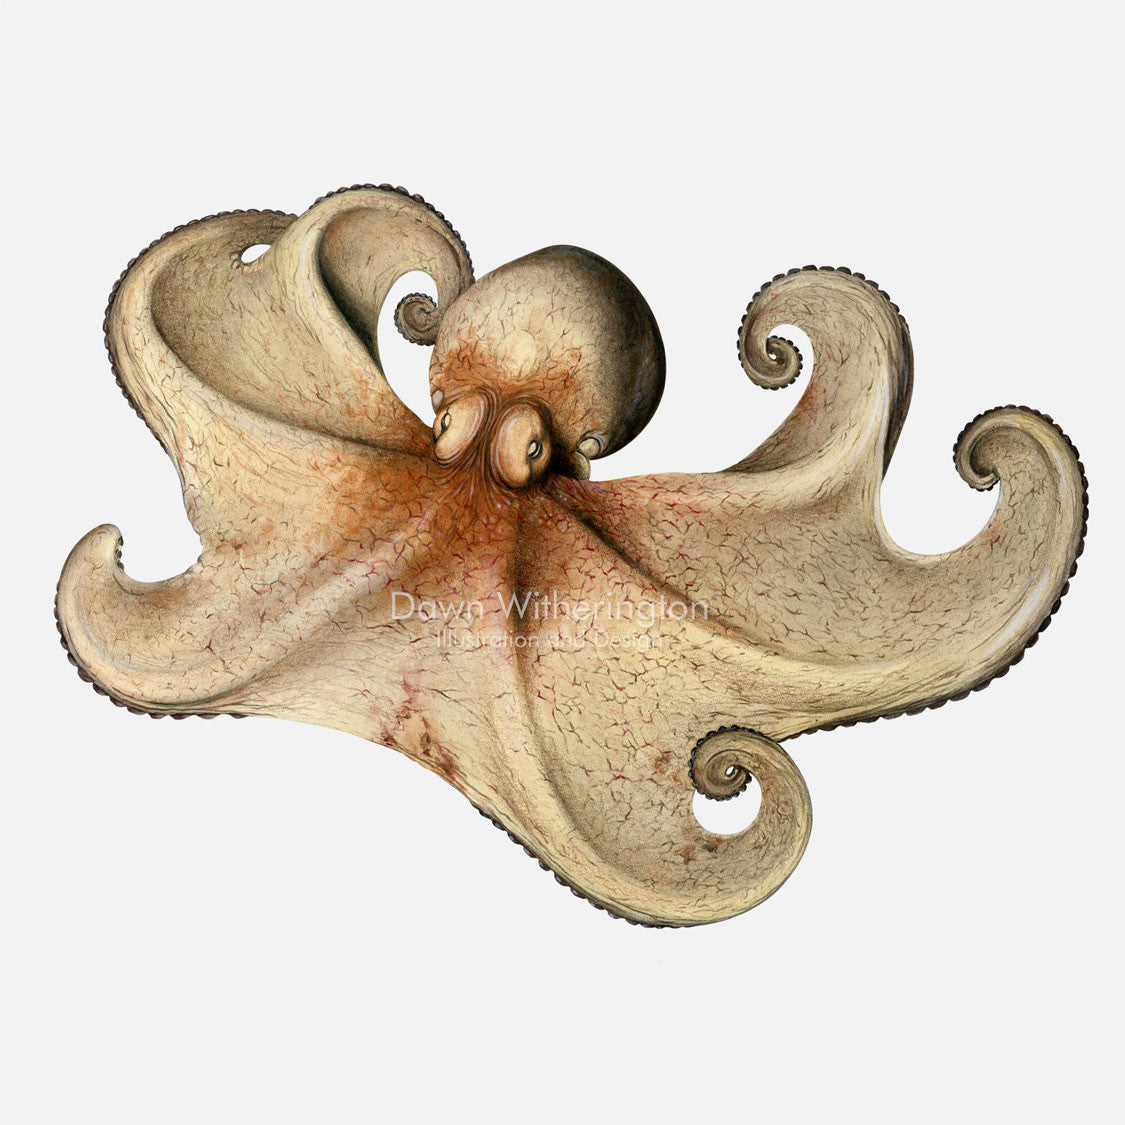 This beautiful drawing of a Caribbean reef octopus, Octopus briareus, is biologically accurate in detail.